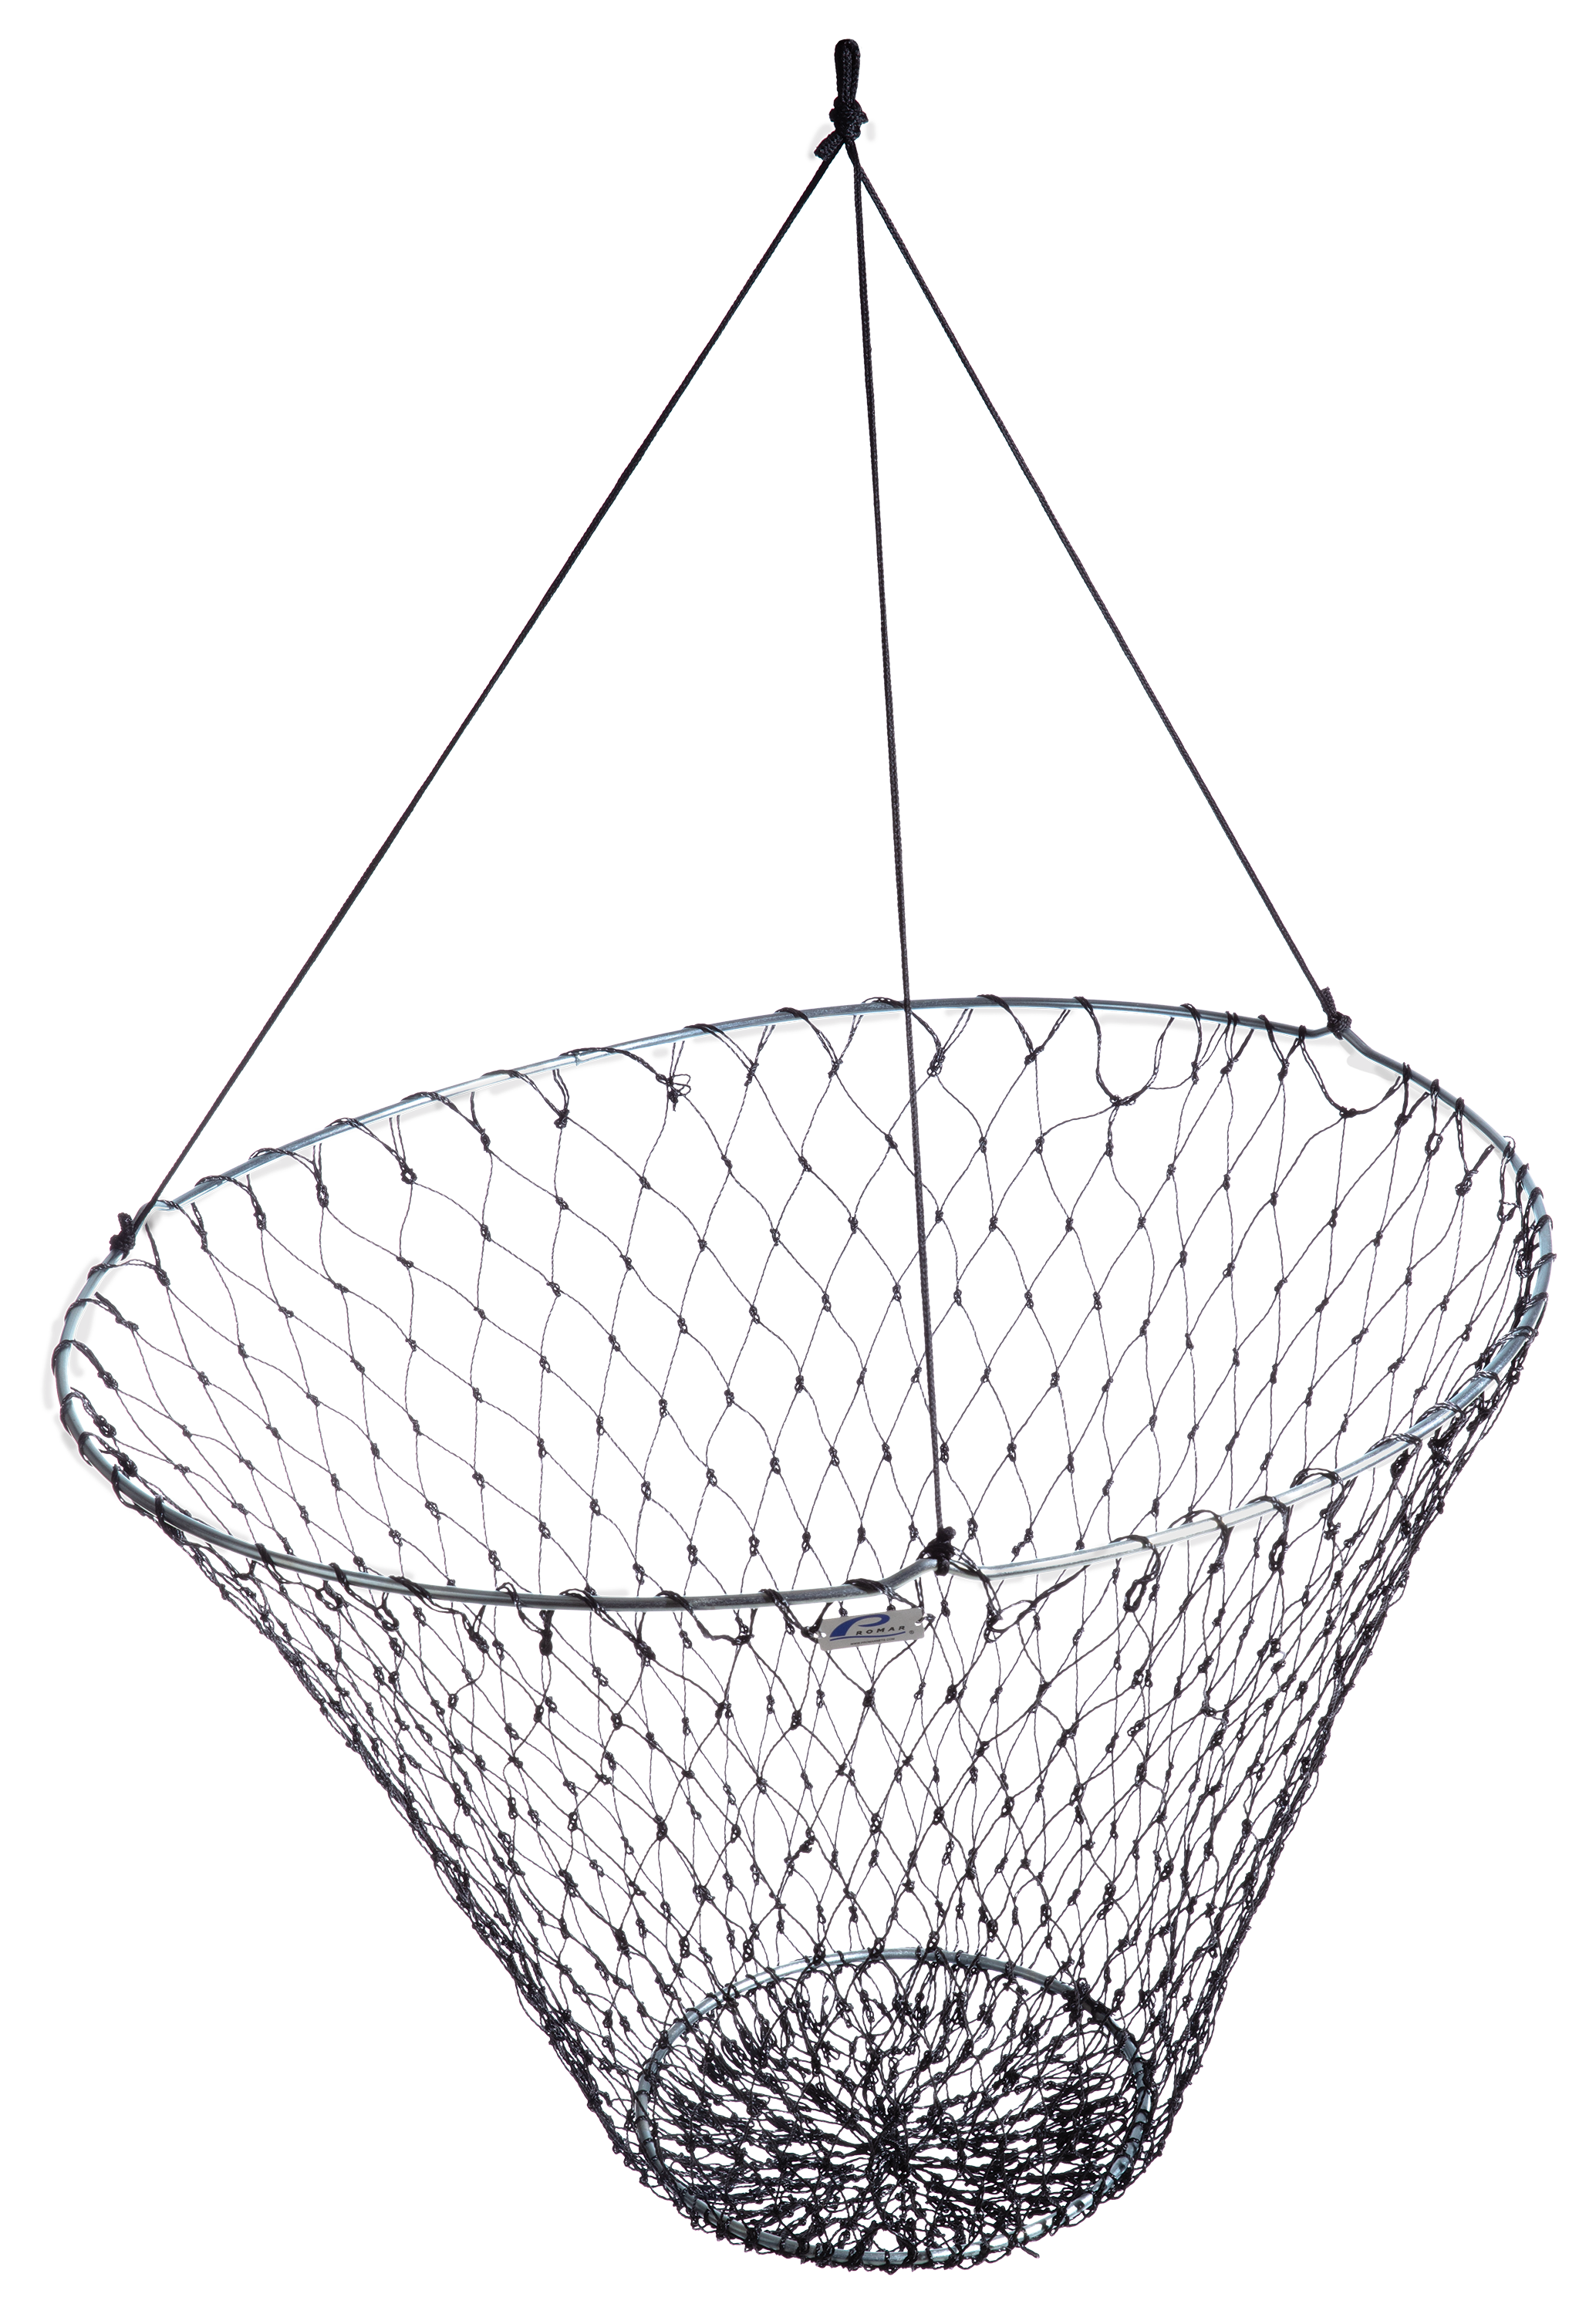 Bridge or Pier 36 Fishing Net and 16 Net - sporting goods - by